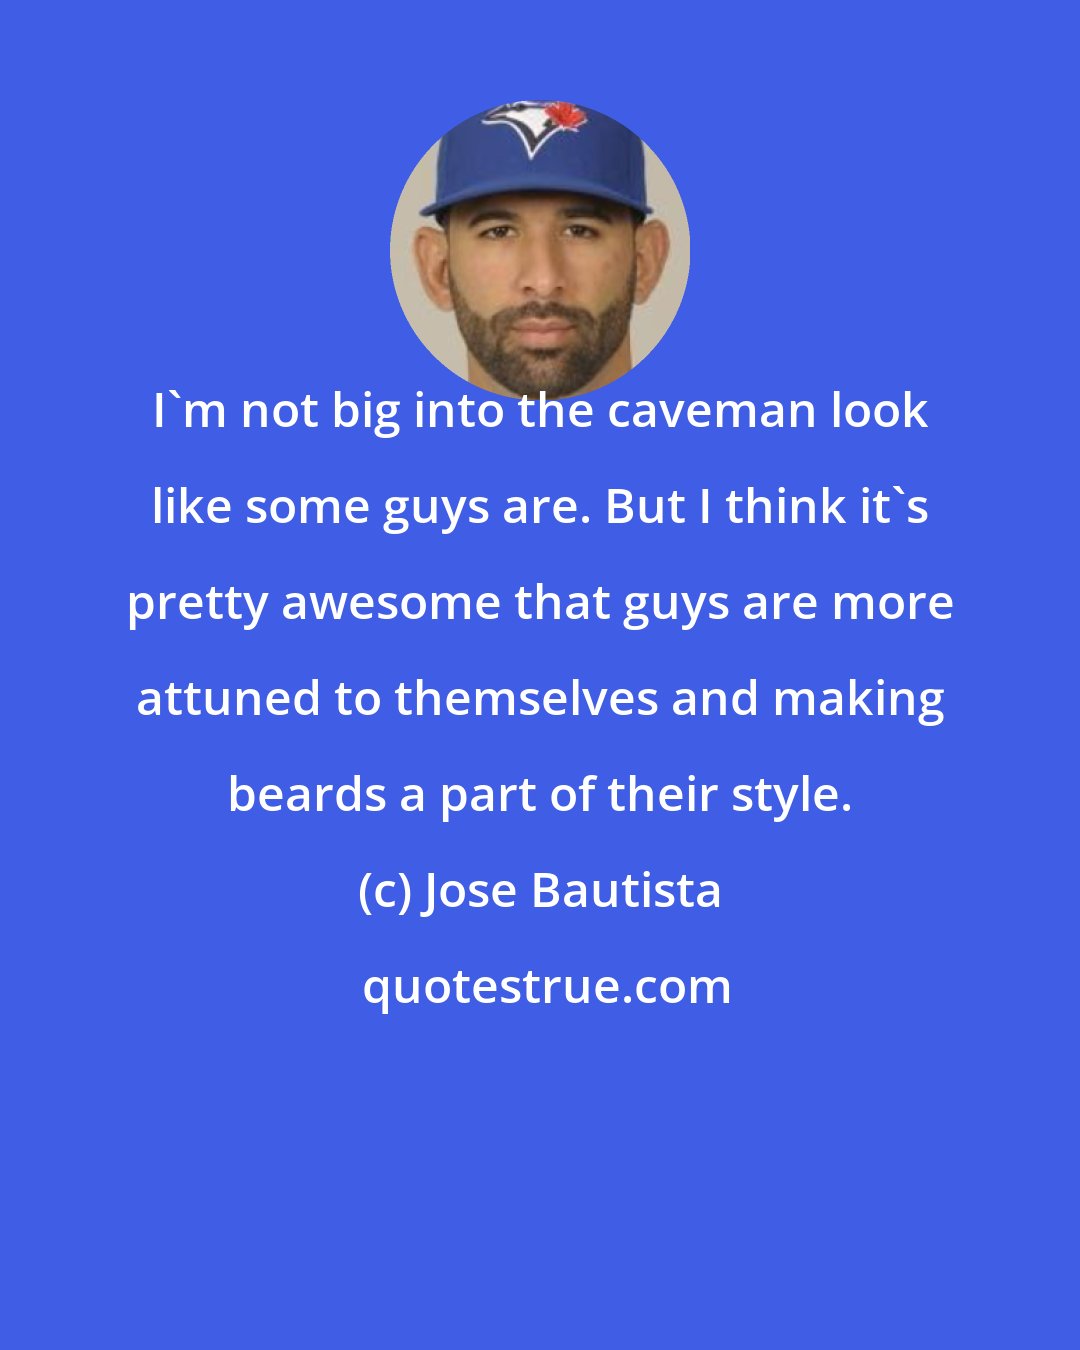 Jose Bautista: I'm not big into the caveman look like some guys are. But I think it's pretty awesome that guys are more attuned to themselves and making beards a part of their style.